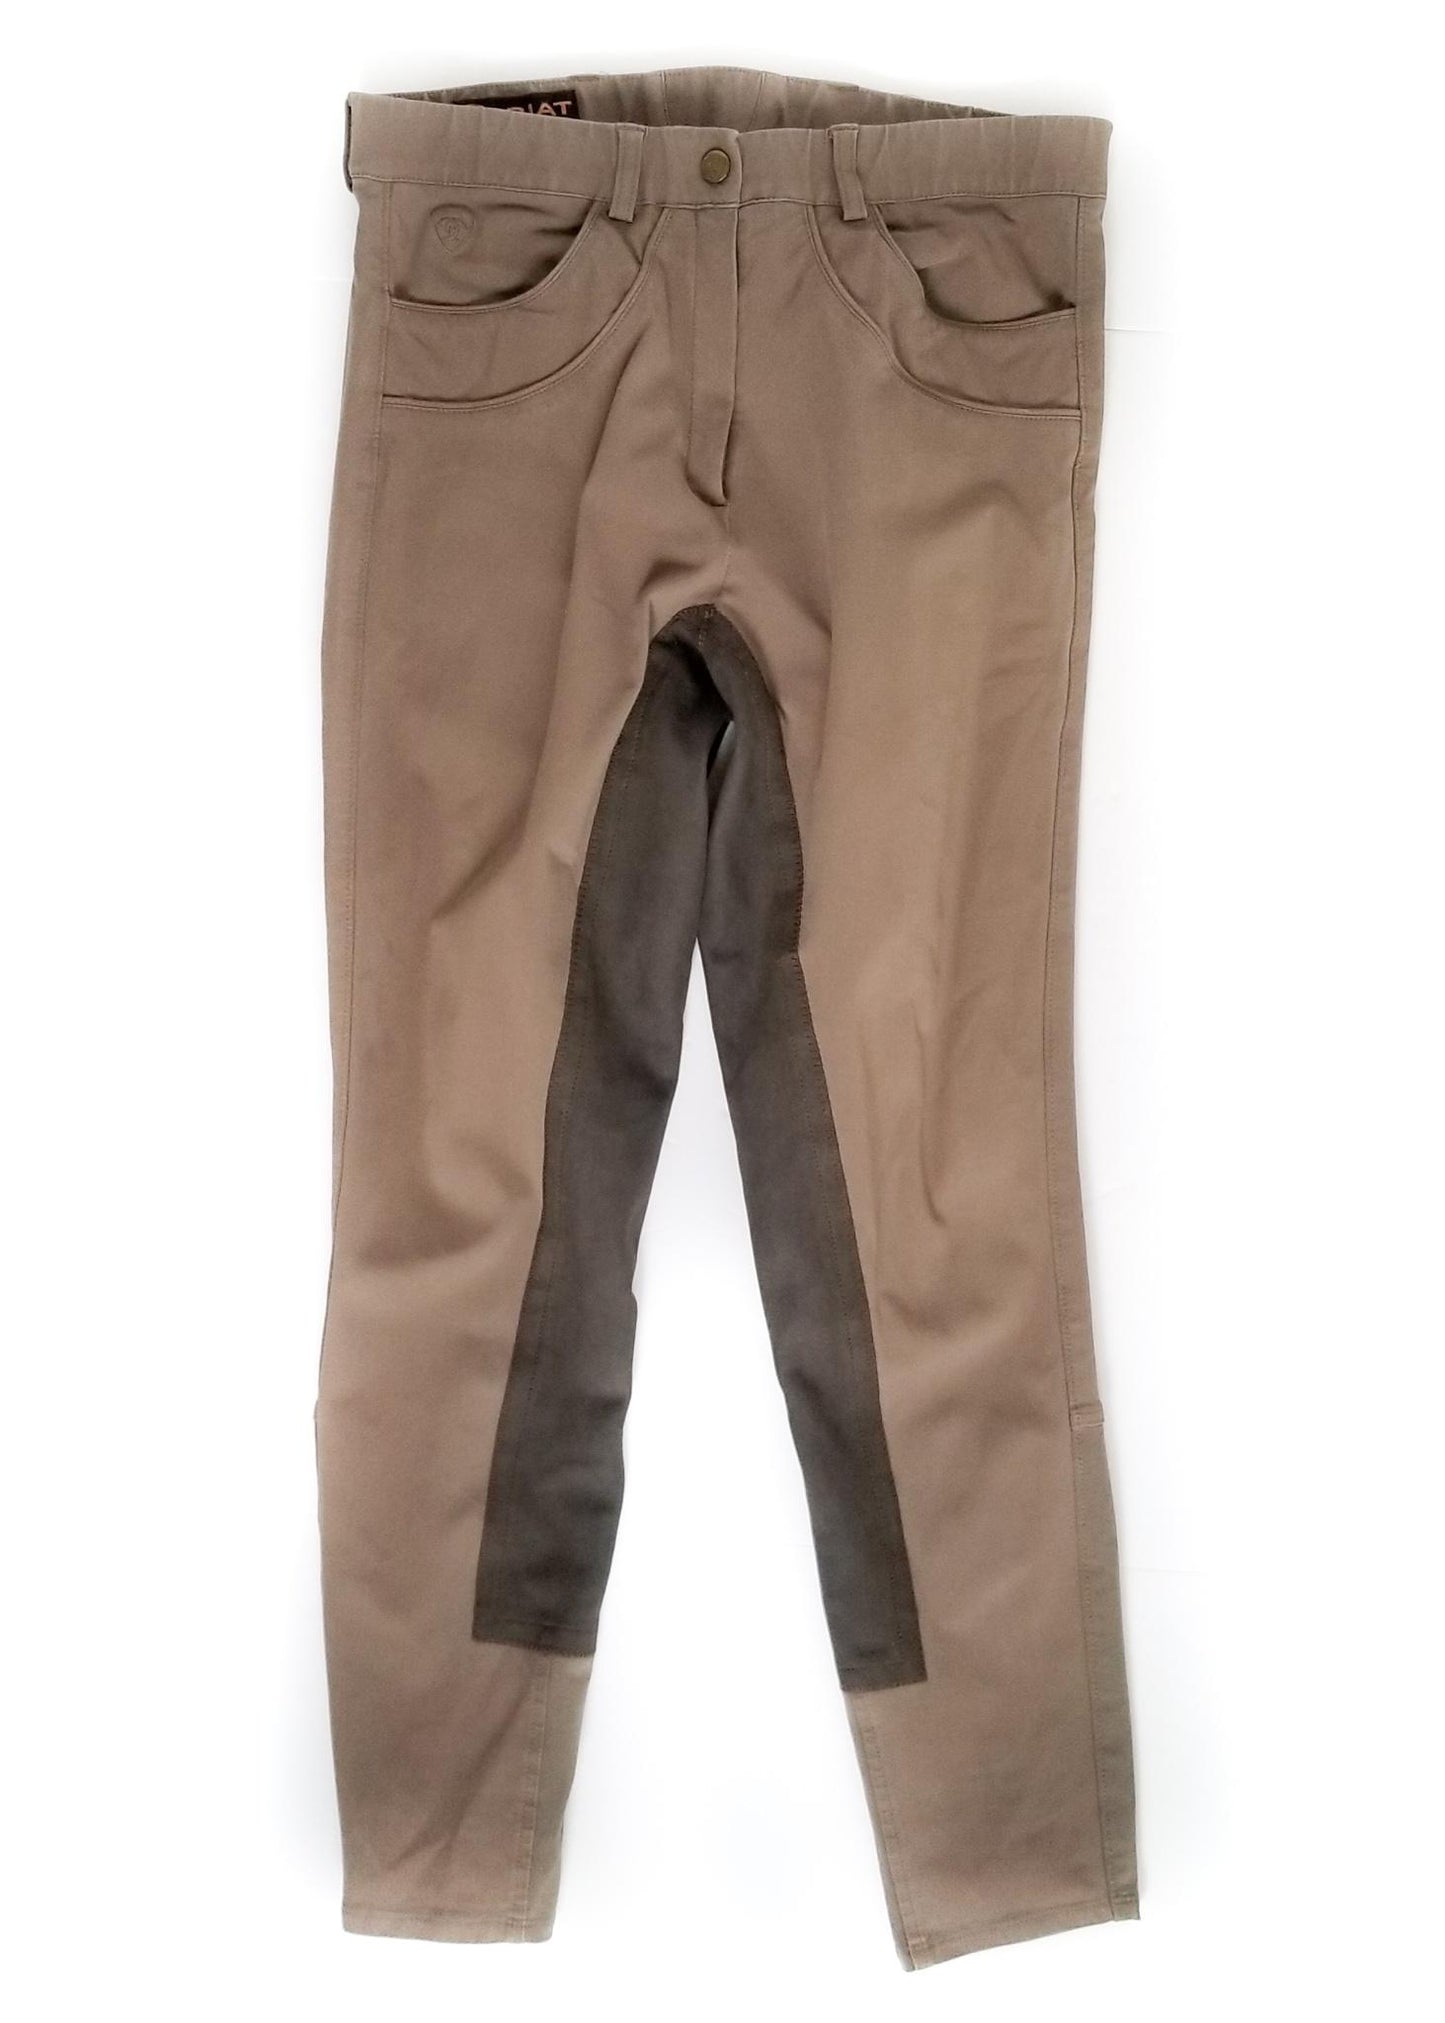 Ariat Olympia Full Seat Breeches - Light Brown - 32R